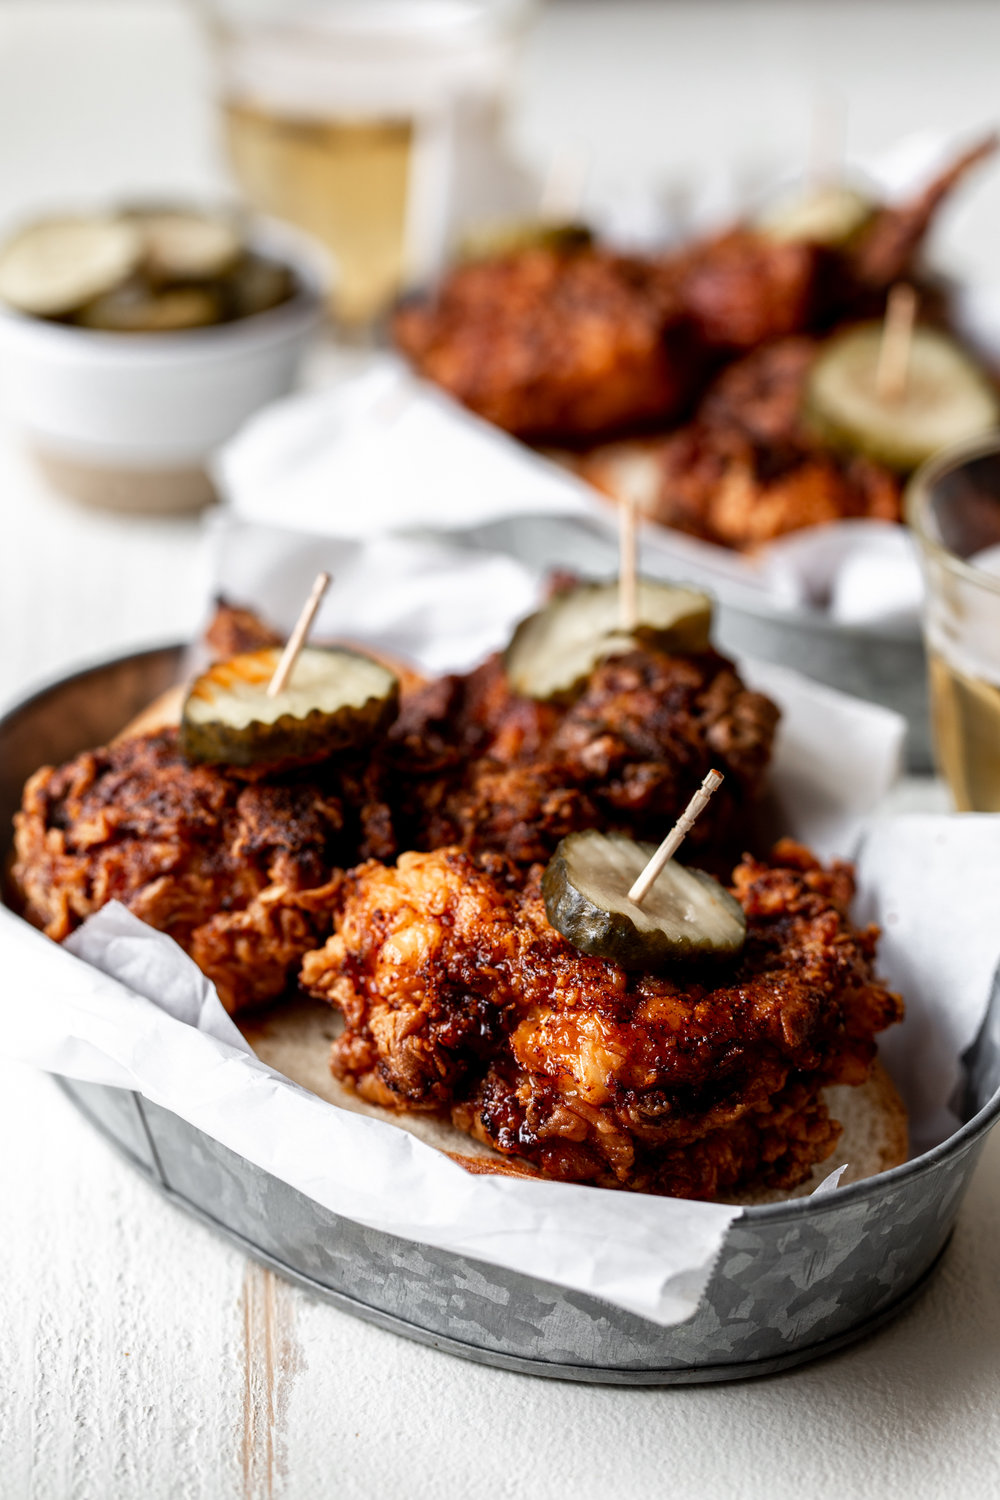 Nashville Style Hot Chicken recipe from cooking with cocktail rings